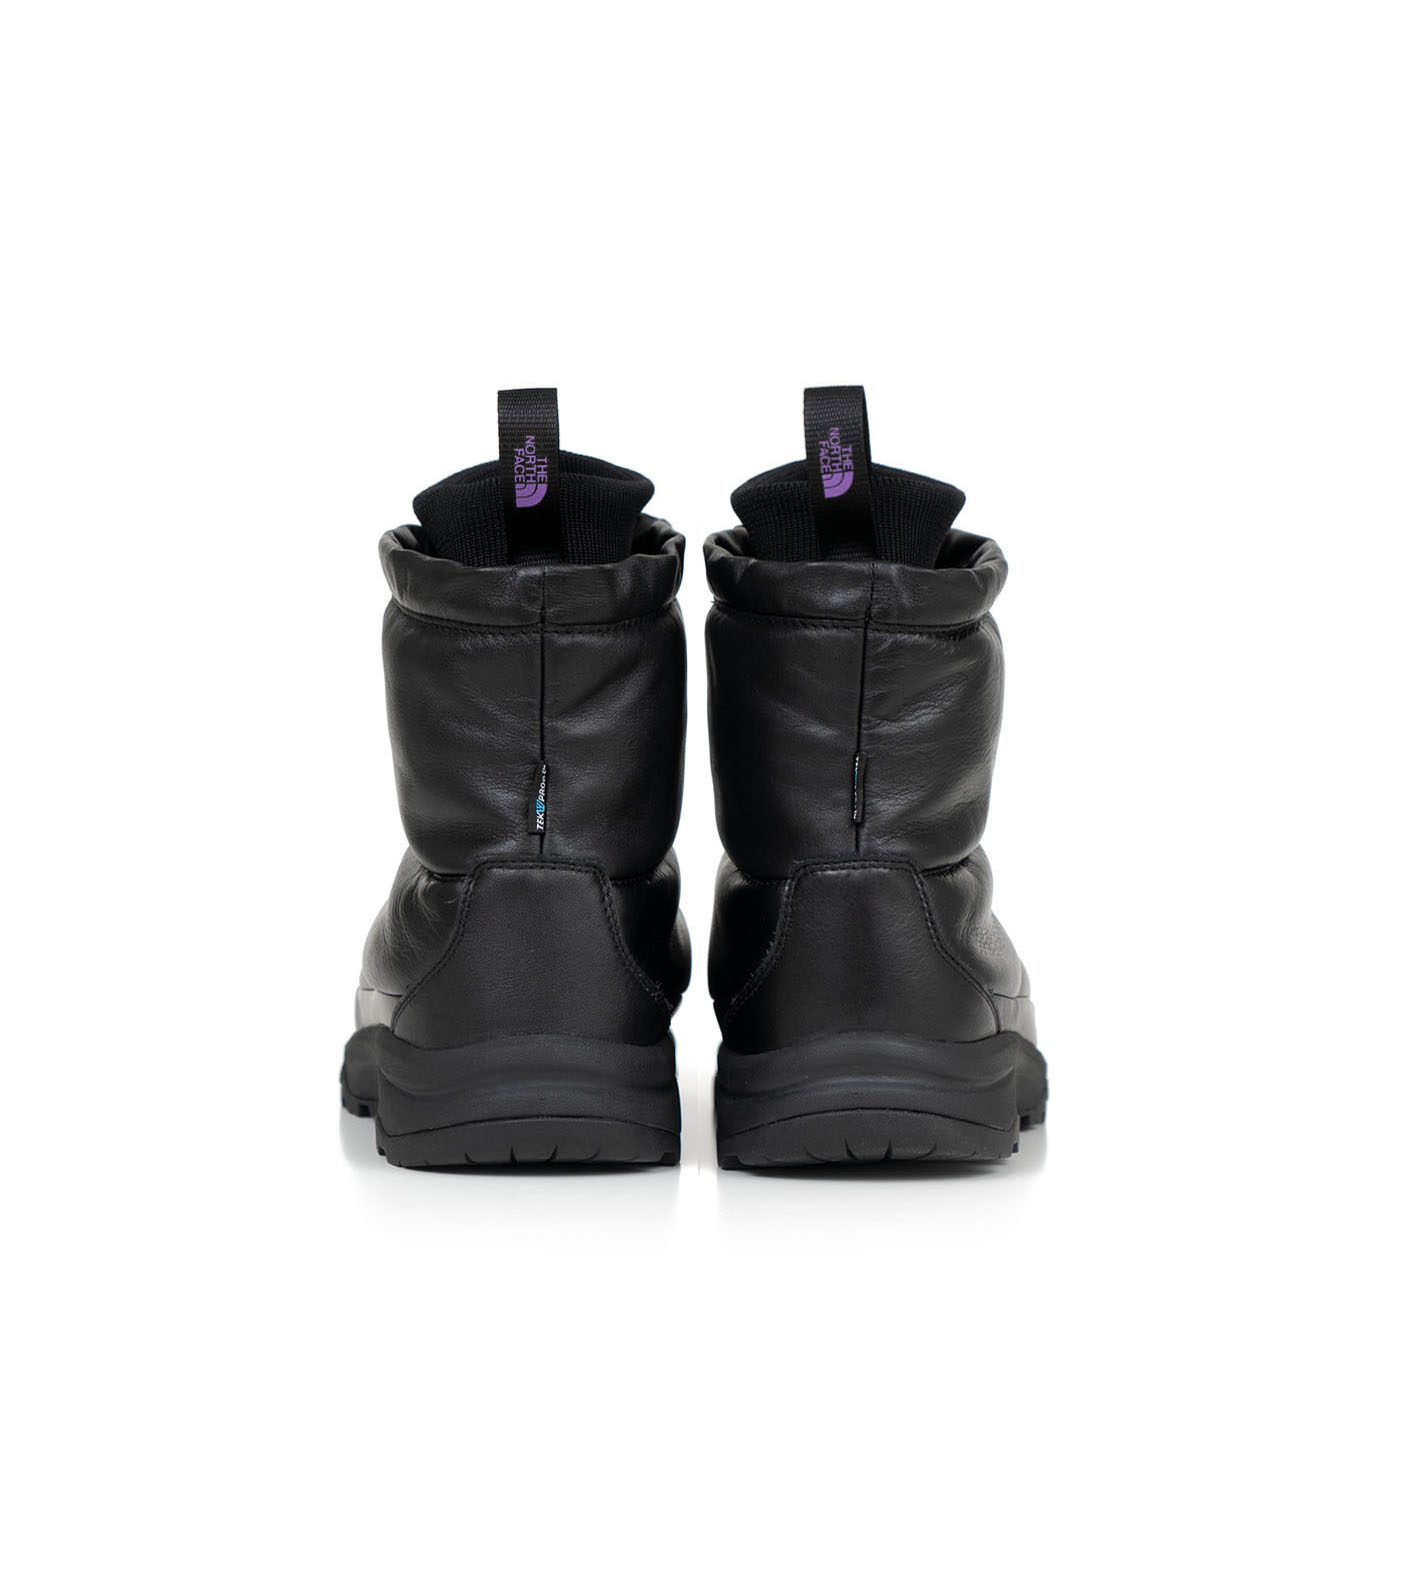 Nuptse Bootie WP Leather Knit Mid